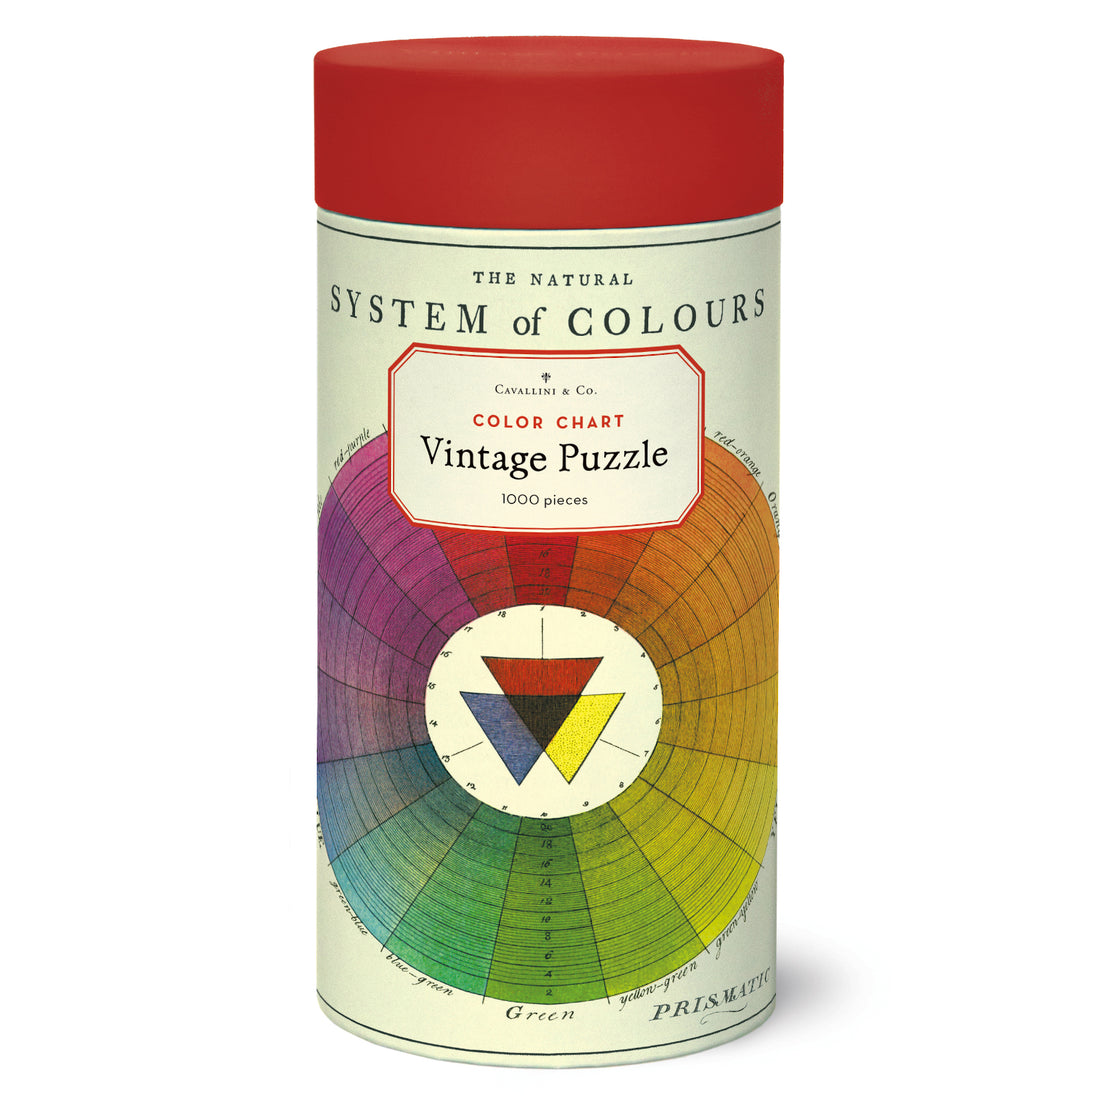 Replace: A 1000-piece Color Wheel Puzzle
With: A 1000-piece Cavallini Papers &amp; Co Color Wheel Puzzle